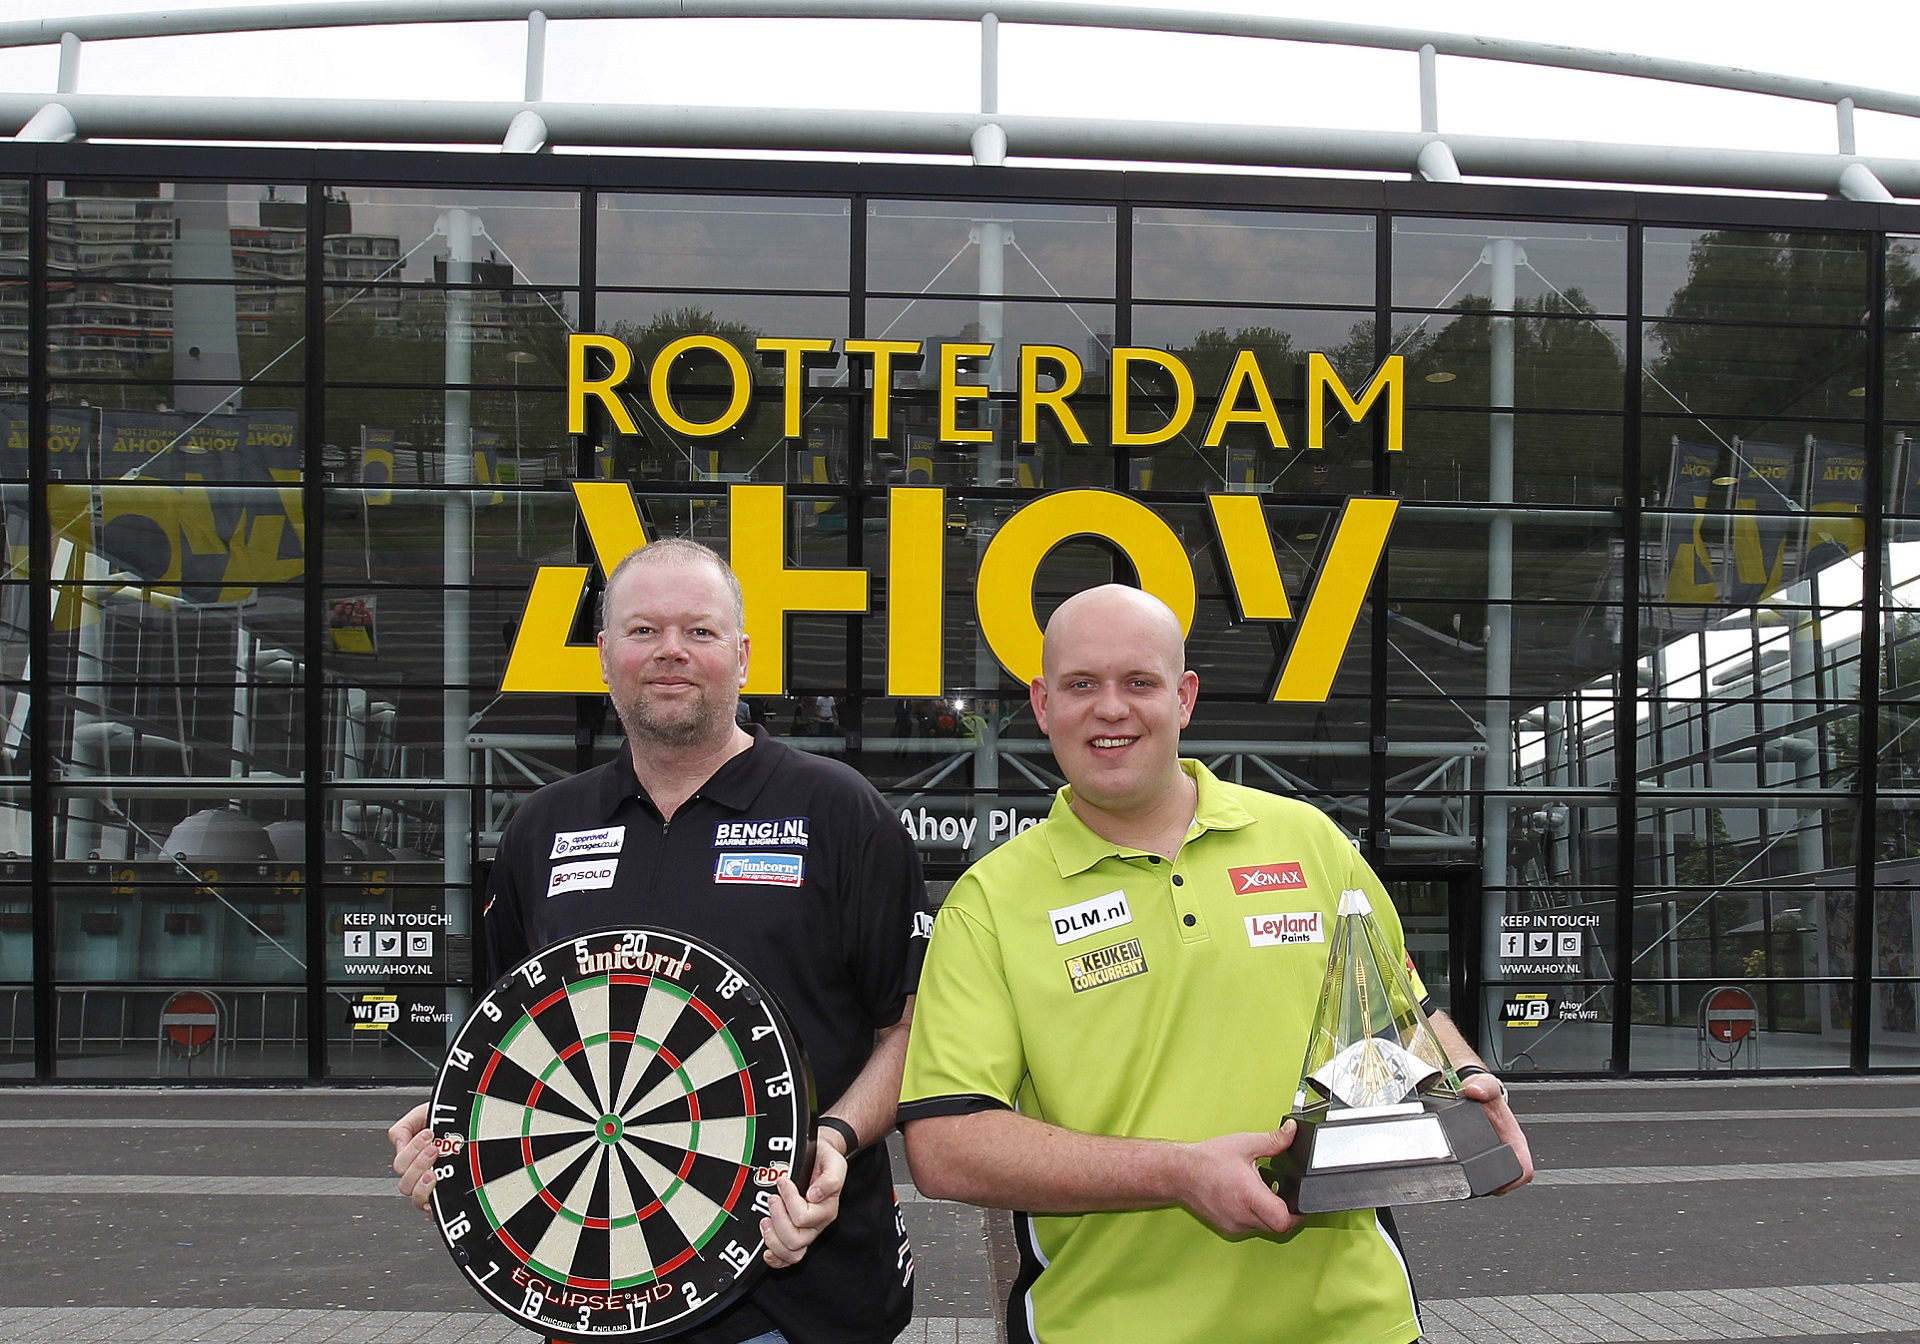 2016 - The Premier League visits Rotterdam Ahoy for the first time